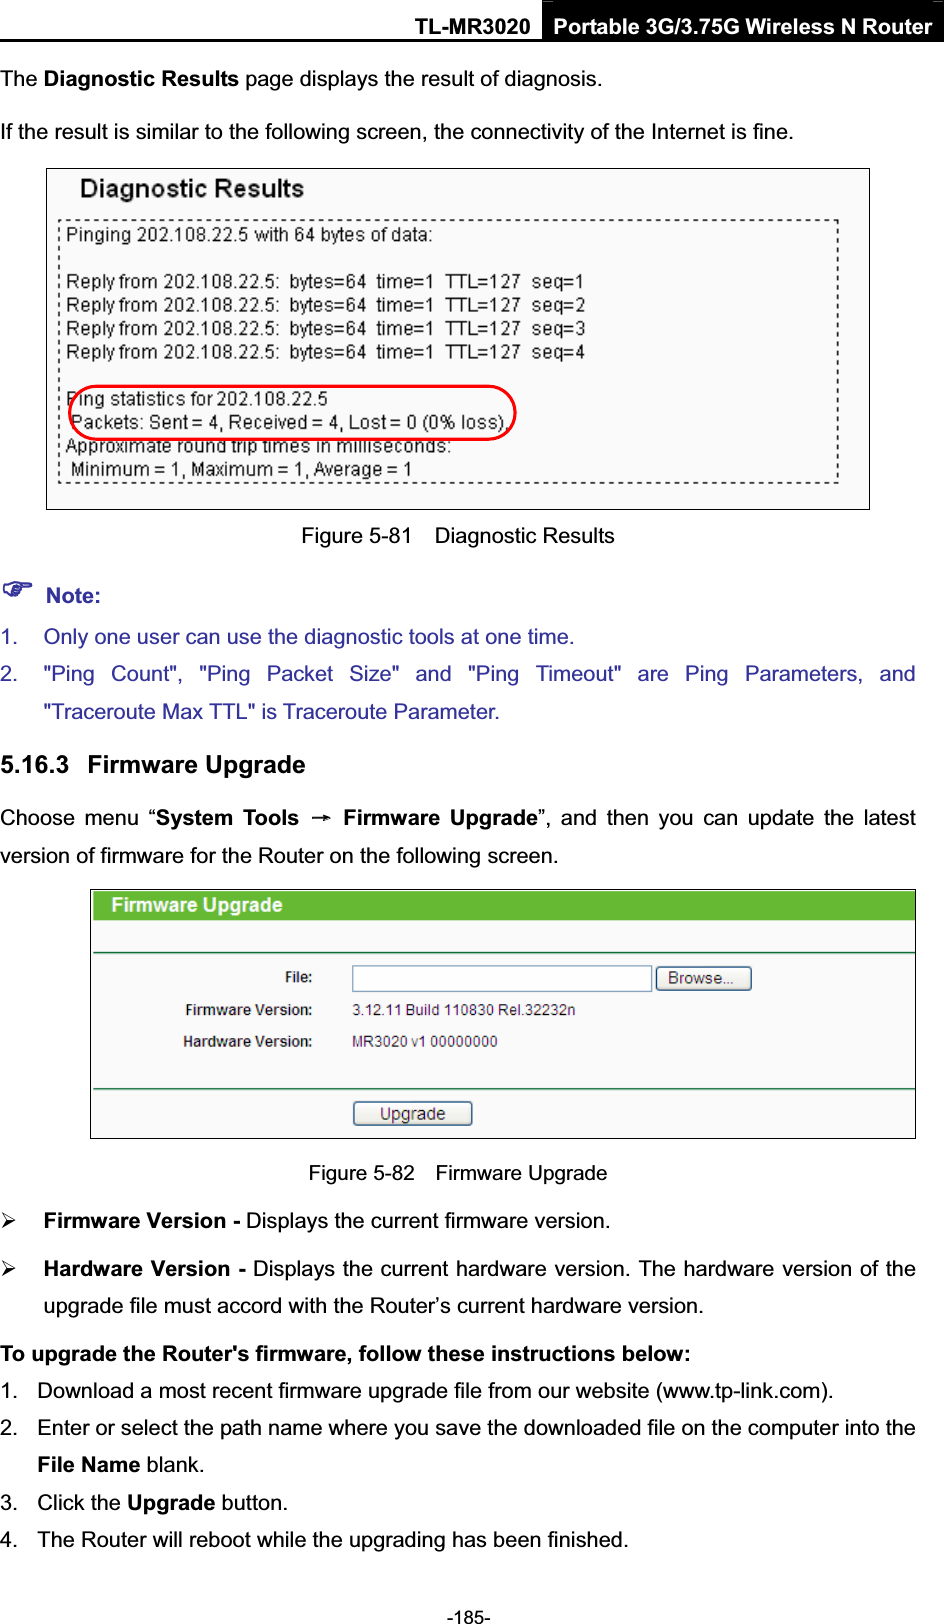 TL-MR3020 Portable 3G/3.75G Wireless N Router-185-The Diagnostic Results page displays the result of diagnosis. If the result is similar to the following screen, the connectivity of the Internet is fine. Figure 5-81    Diagnostic Results )Note:1.  Only one user can use the diagnostic tools at one time.   2.  &quot;Ping  Count&quot;,  &quot;Ping  Packet  Size&quot;  and  &quot;Ping  Timeout&quot;  are  Ping  Parameters,  and &quot;Traceroute Max TTL&quot; is Traceroute Parameter.   5.16.3 Firmware Upgrade Choose  menu  “System  Tools  ė  Firmware  Upgrade”,  and  then  you  can  update  the  latest version of firmware for the Router on the following screen. Figure 5-82    Firmware Upgrade¾Firmware Version - Displays the current firmware version. ¾Hardware Version - Displays the current hardware version. The hardware version of the upgrade file must accord with the Router’s current hardware version. To upgrade the Router&apos;s firmware, follow these instructions below: 1.  Download a most recent firmware upgrade file from our website (www.tp-link.com).   2.  Enter or select the path name where you save the downloaded file on the computer into the File Name blank.   3.  Click the Upgrade button.   4.  The Router will reboot while the upgrading has been finished.   